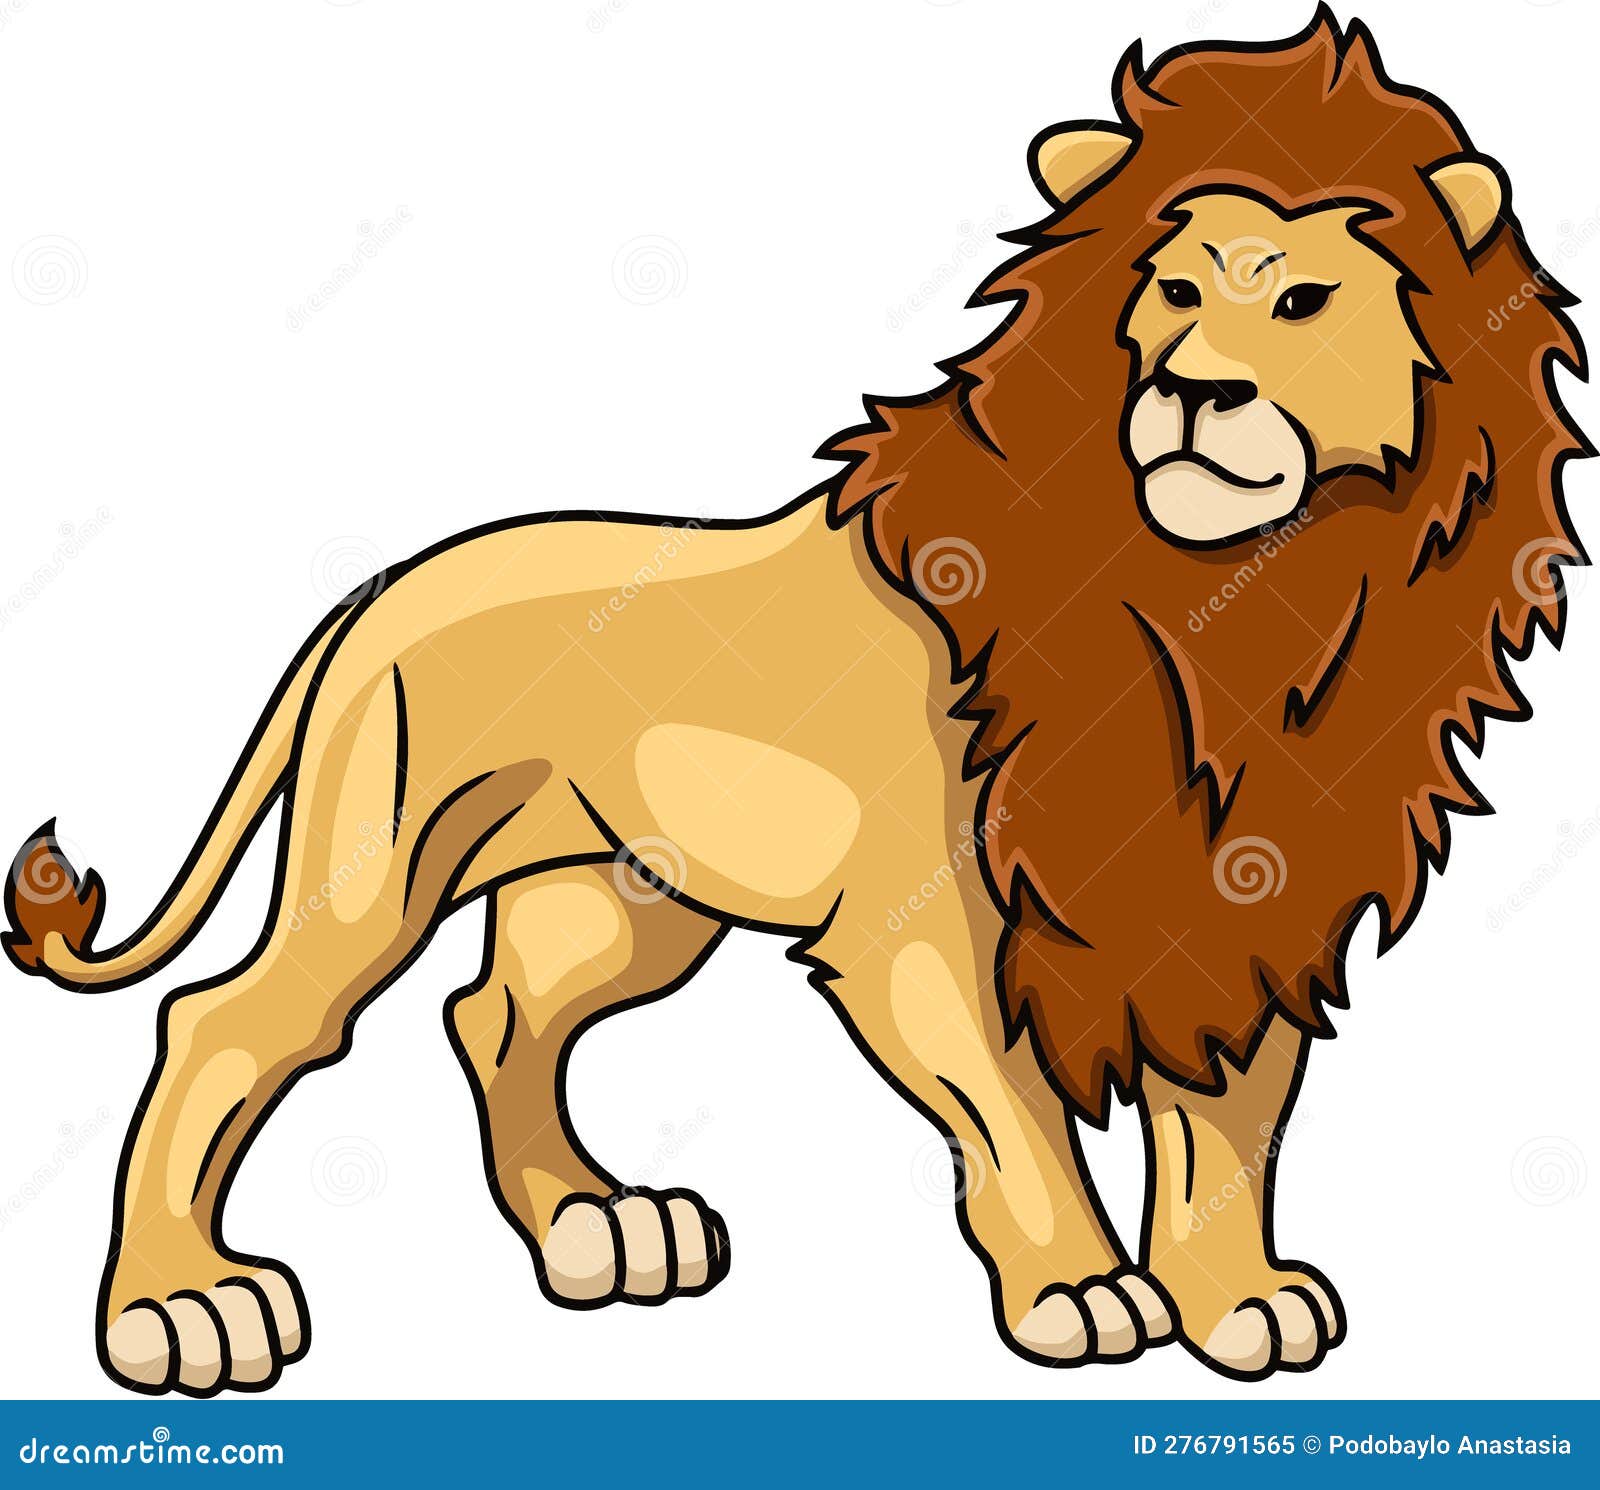 Lion clipart vector stock vector. Illustration of layers - 276791565